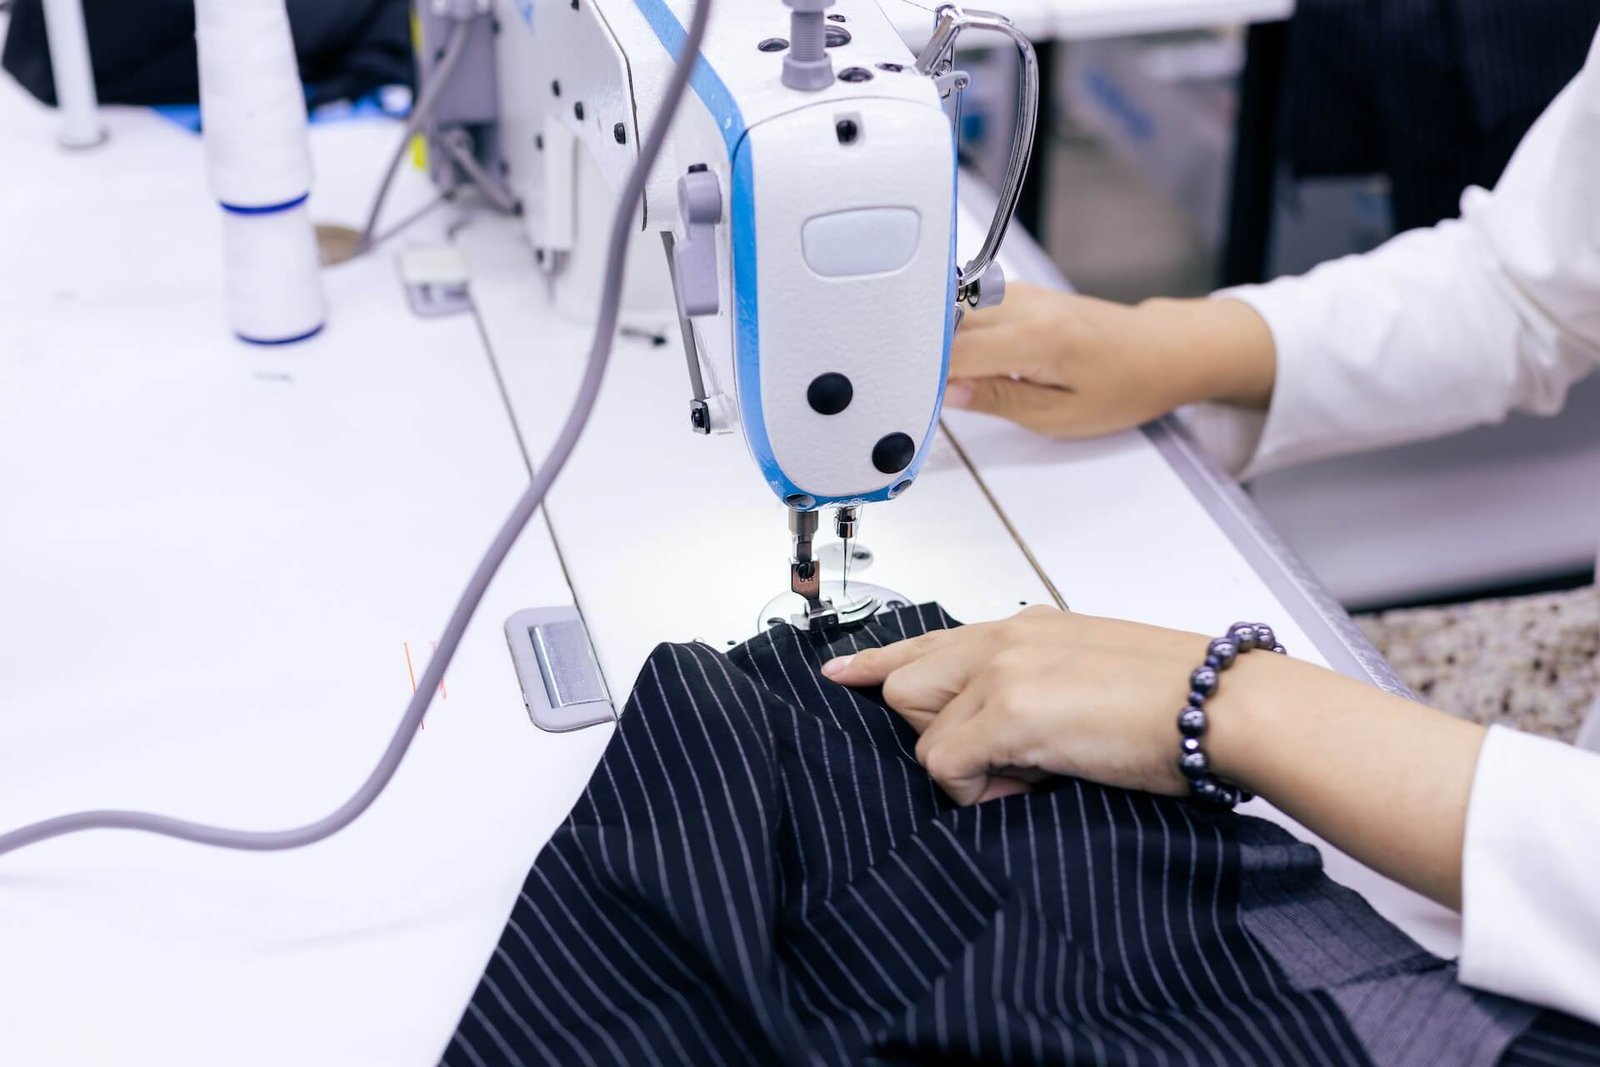 What is a garment factory? How much does it cost to start set up a garment factory?